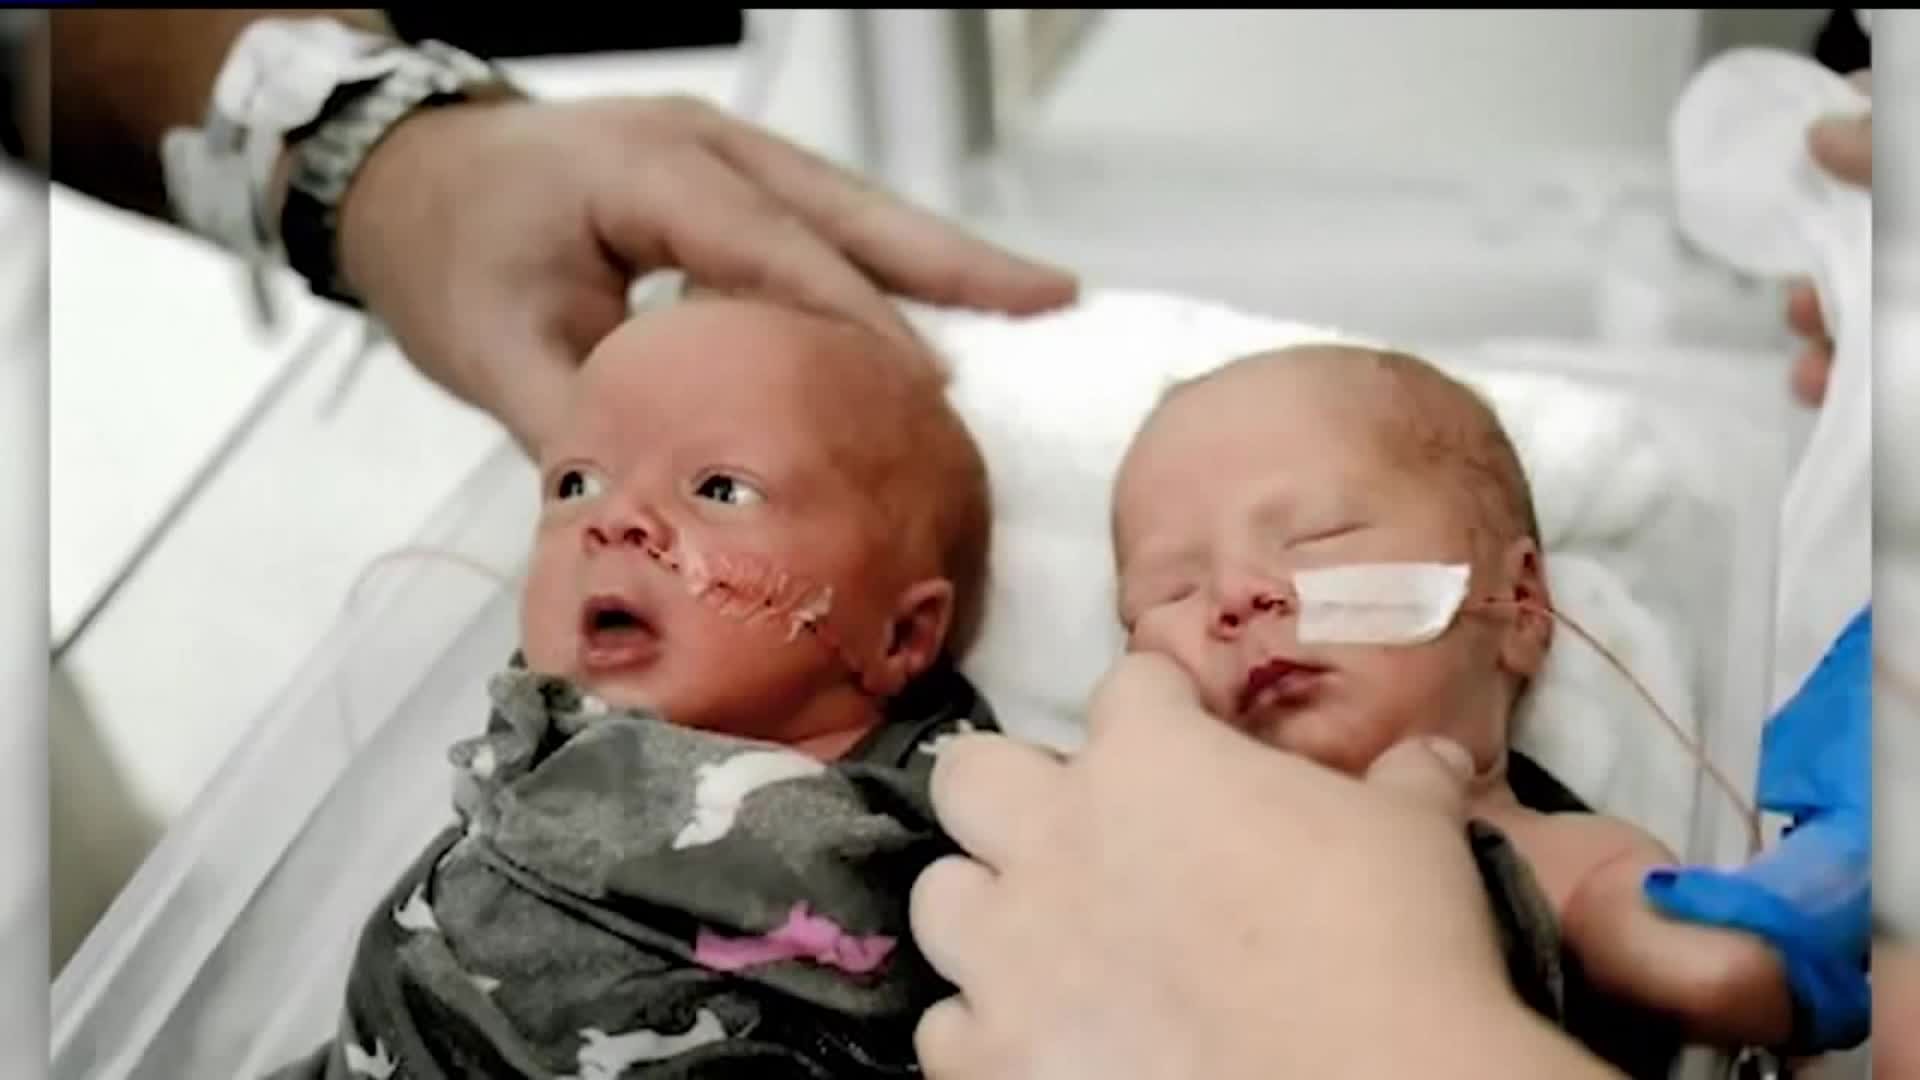 Identical twin babies delivered by identical twin nurses